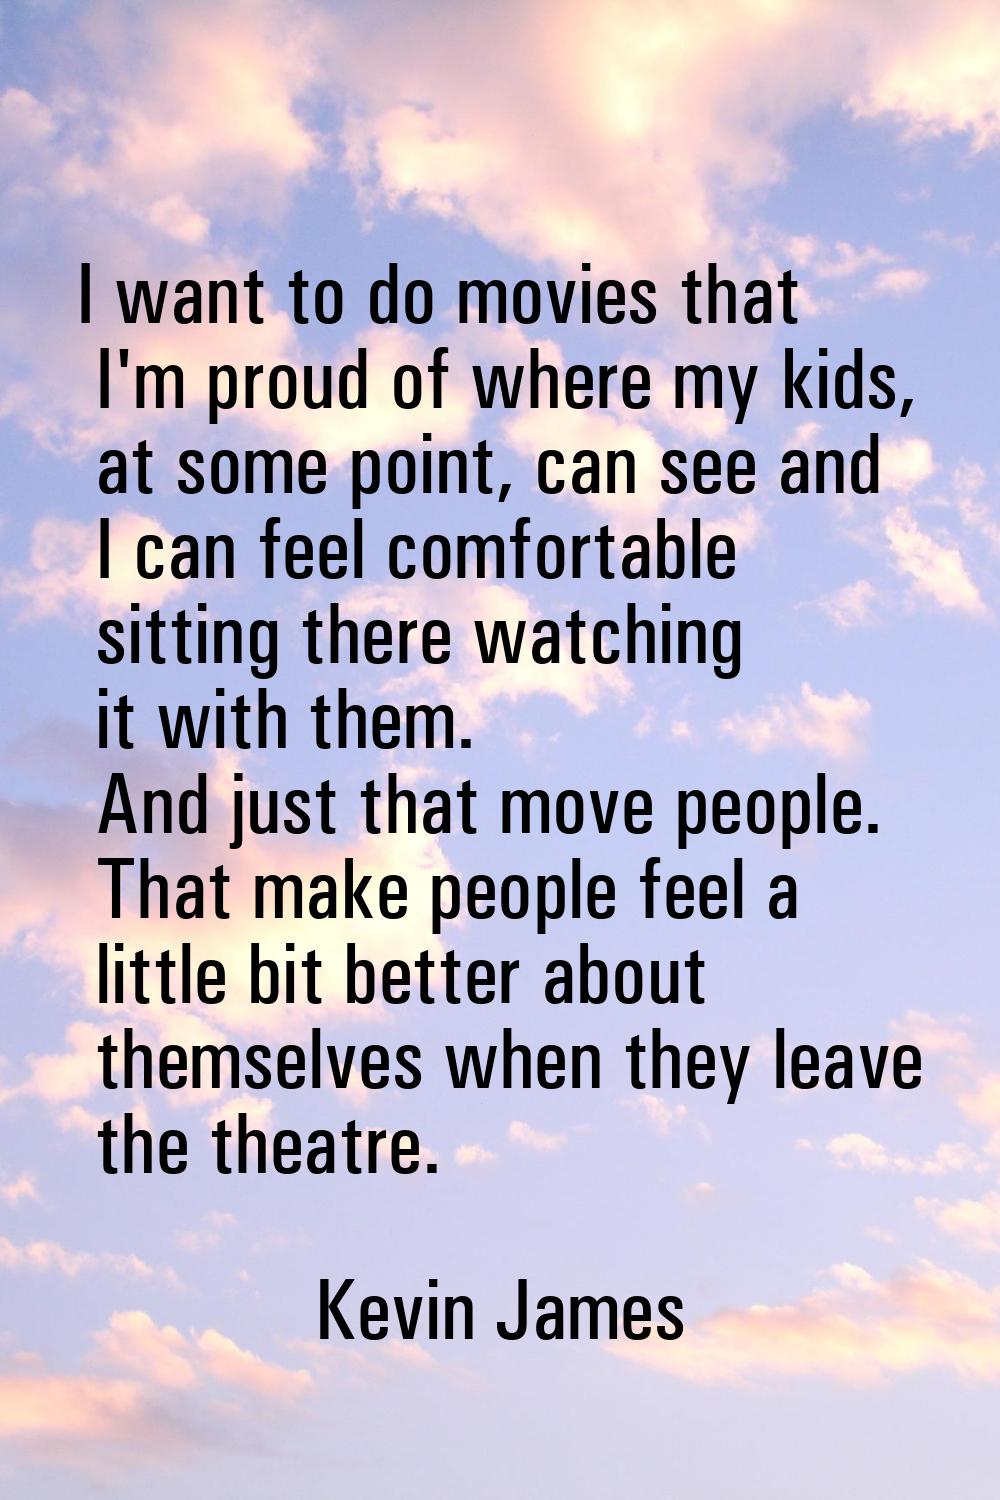 I want to do movies that I'm proud of where my kids, at some point, can see and I can feel comforta